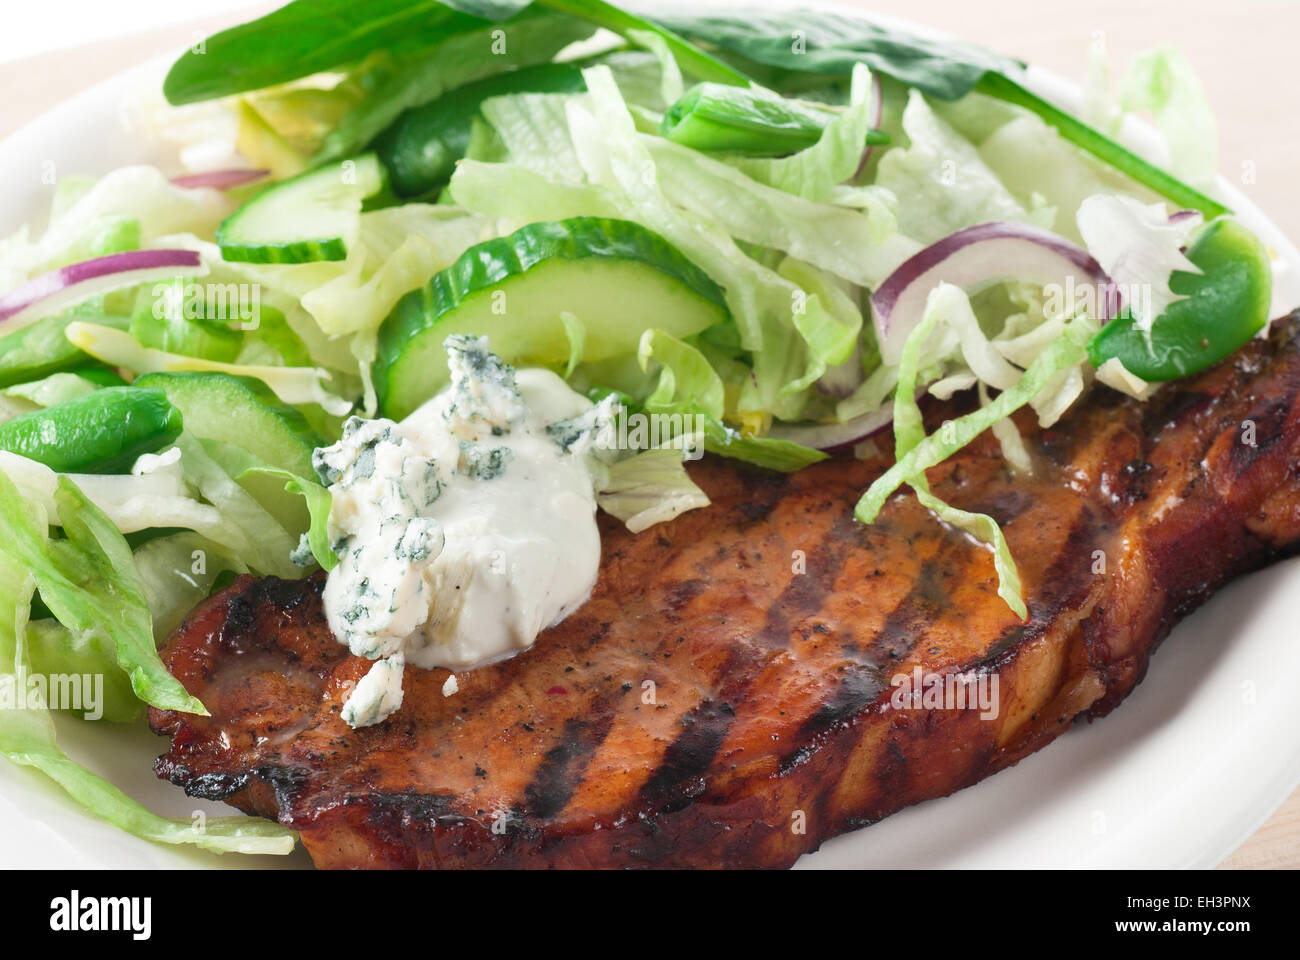 Grilled pork chop with blue cheese dressing and green salad. Stock Photo